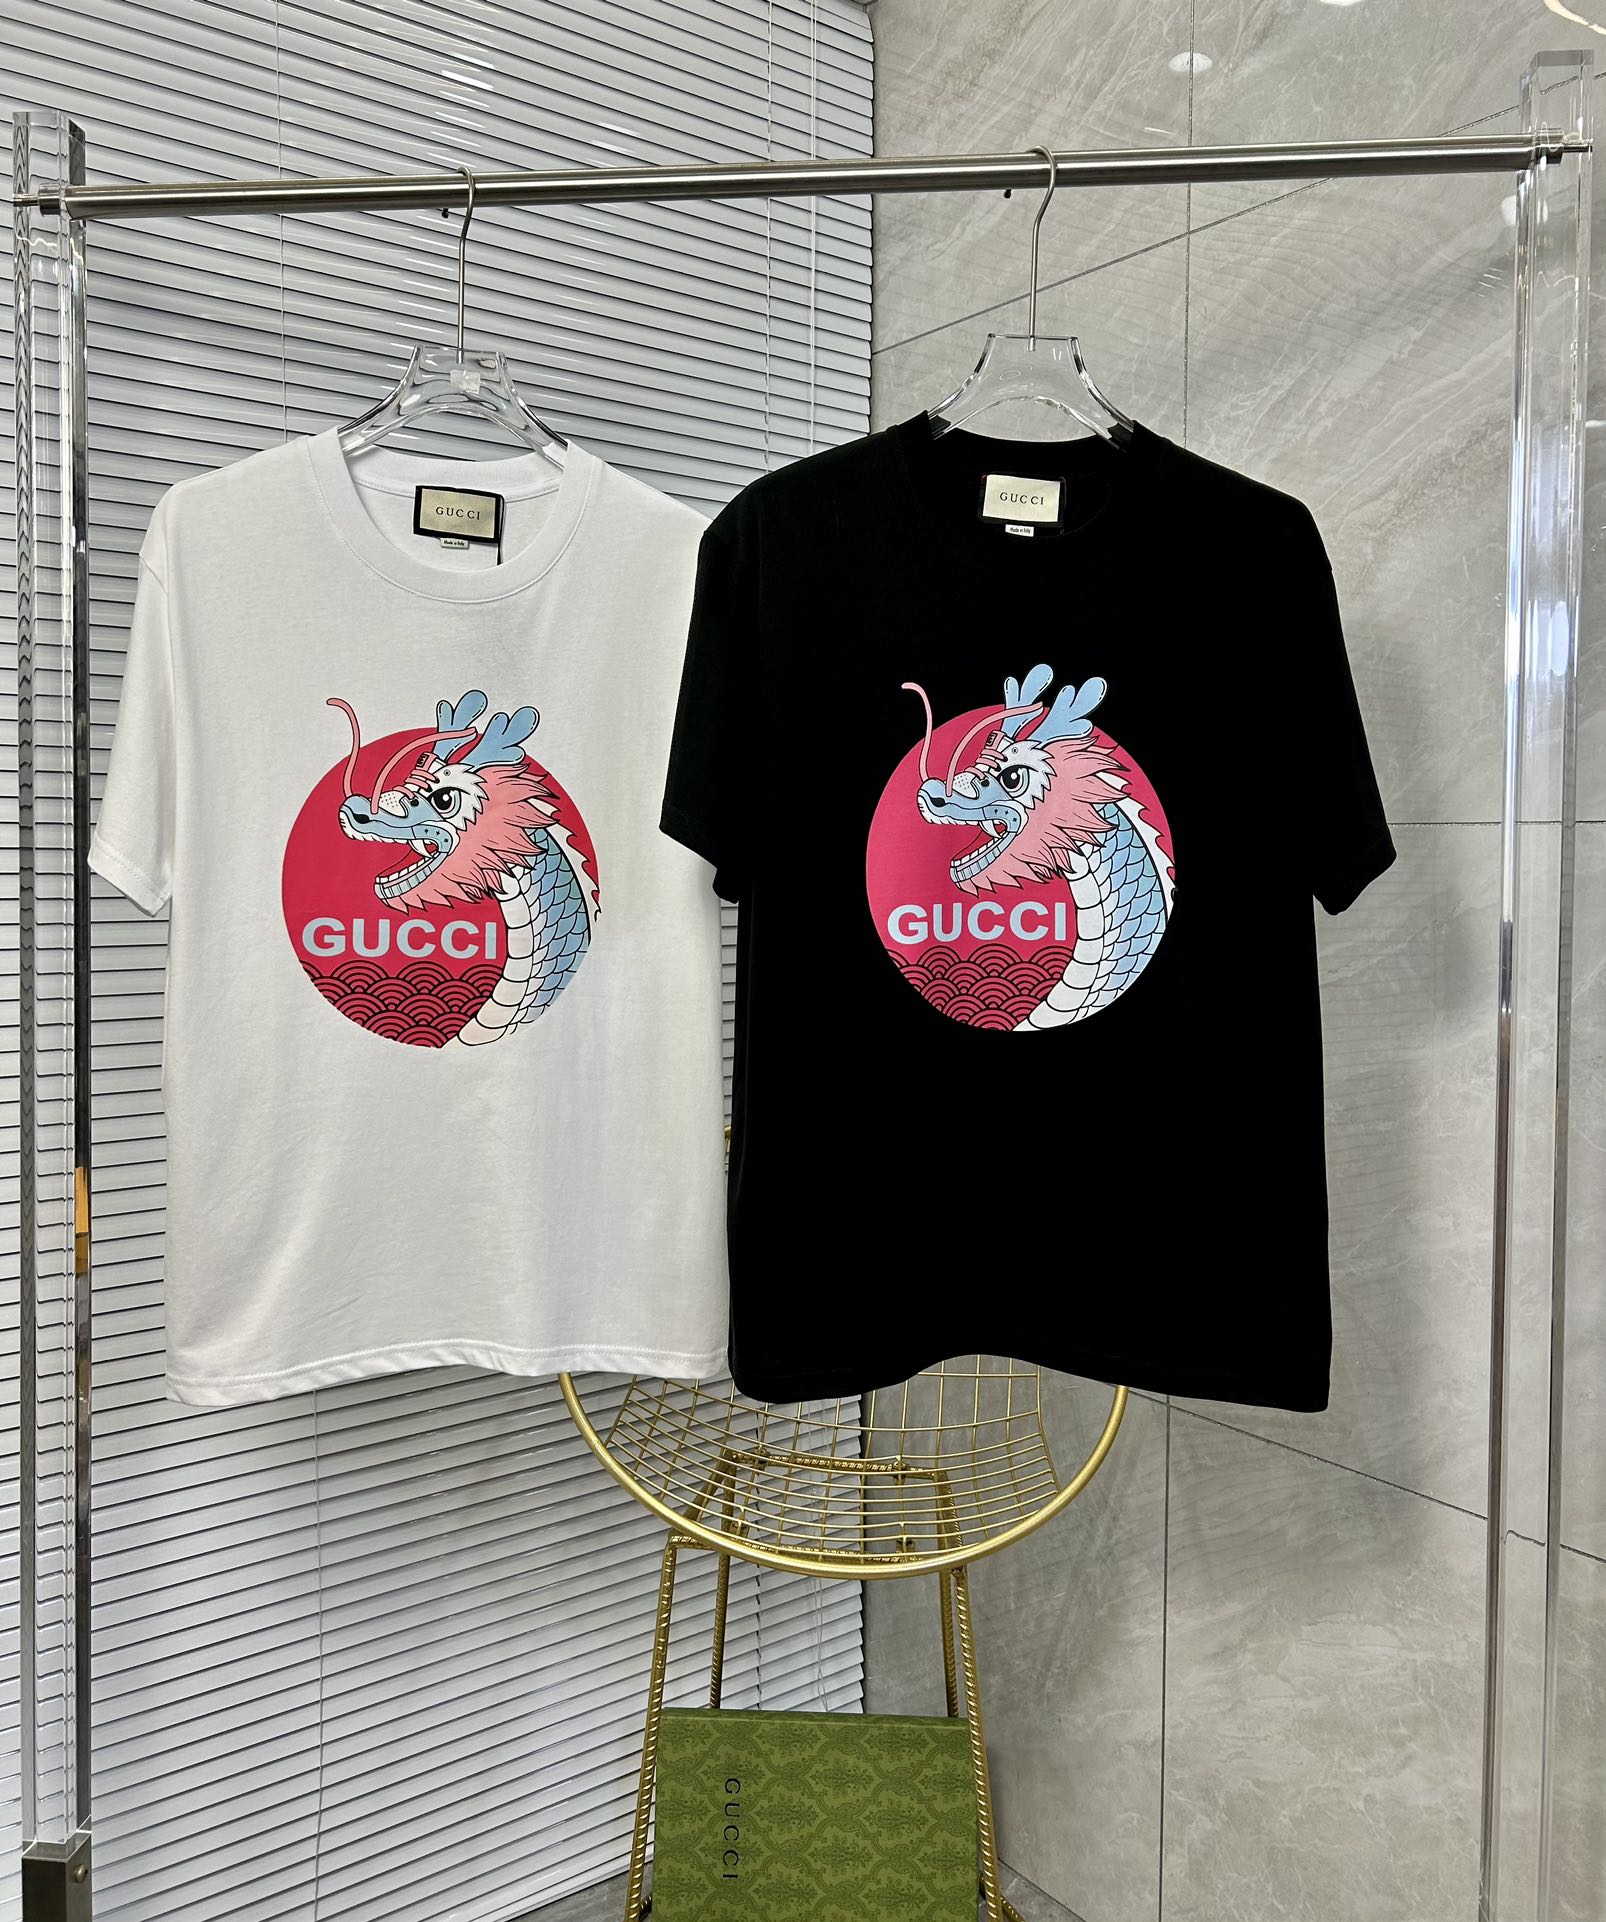 Gucci Clothing T-Shirt Black White Cotton Spring/Summer Collection Fashion Short Sleeve